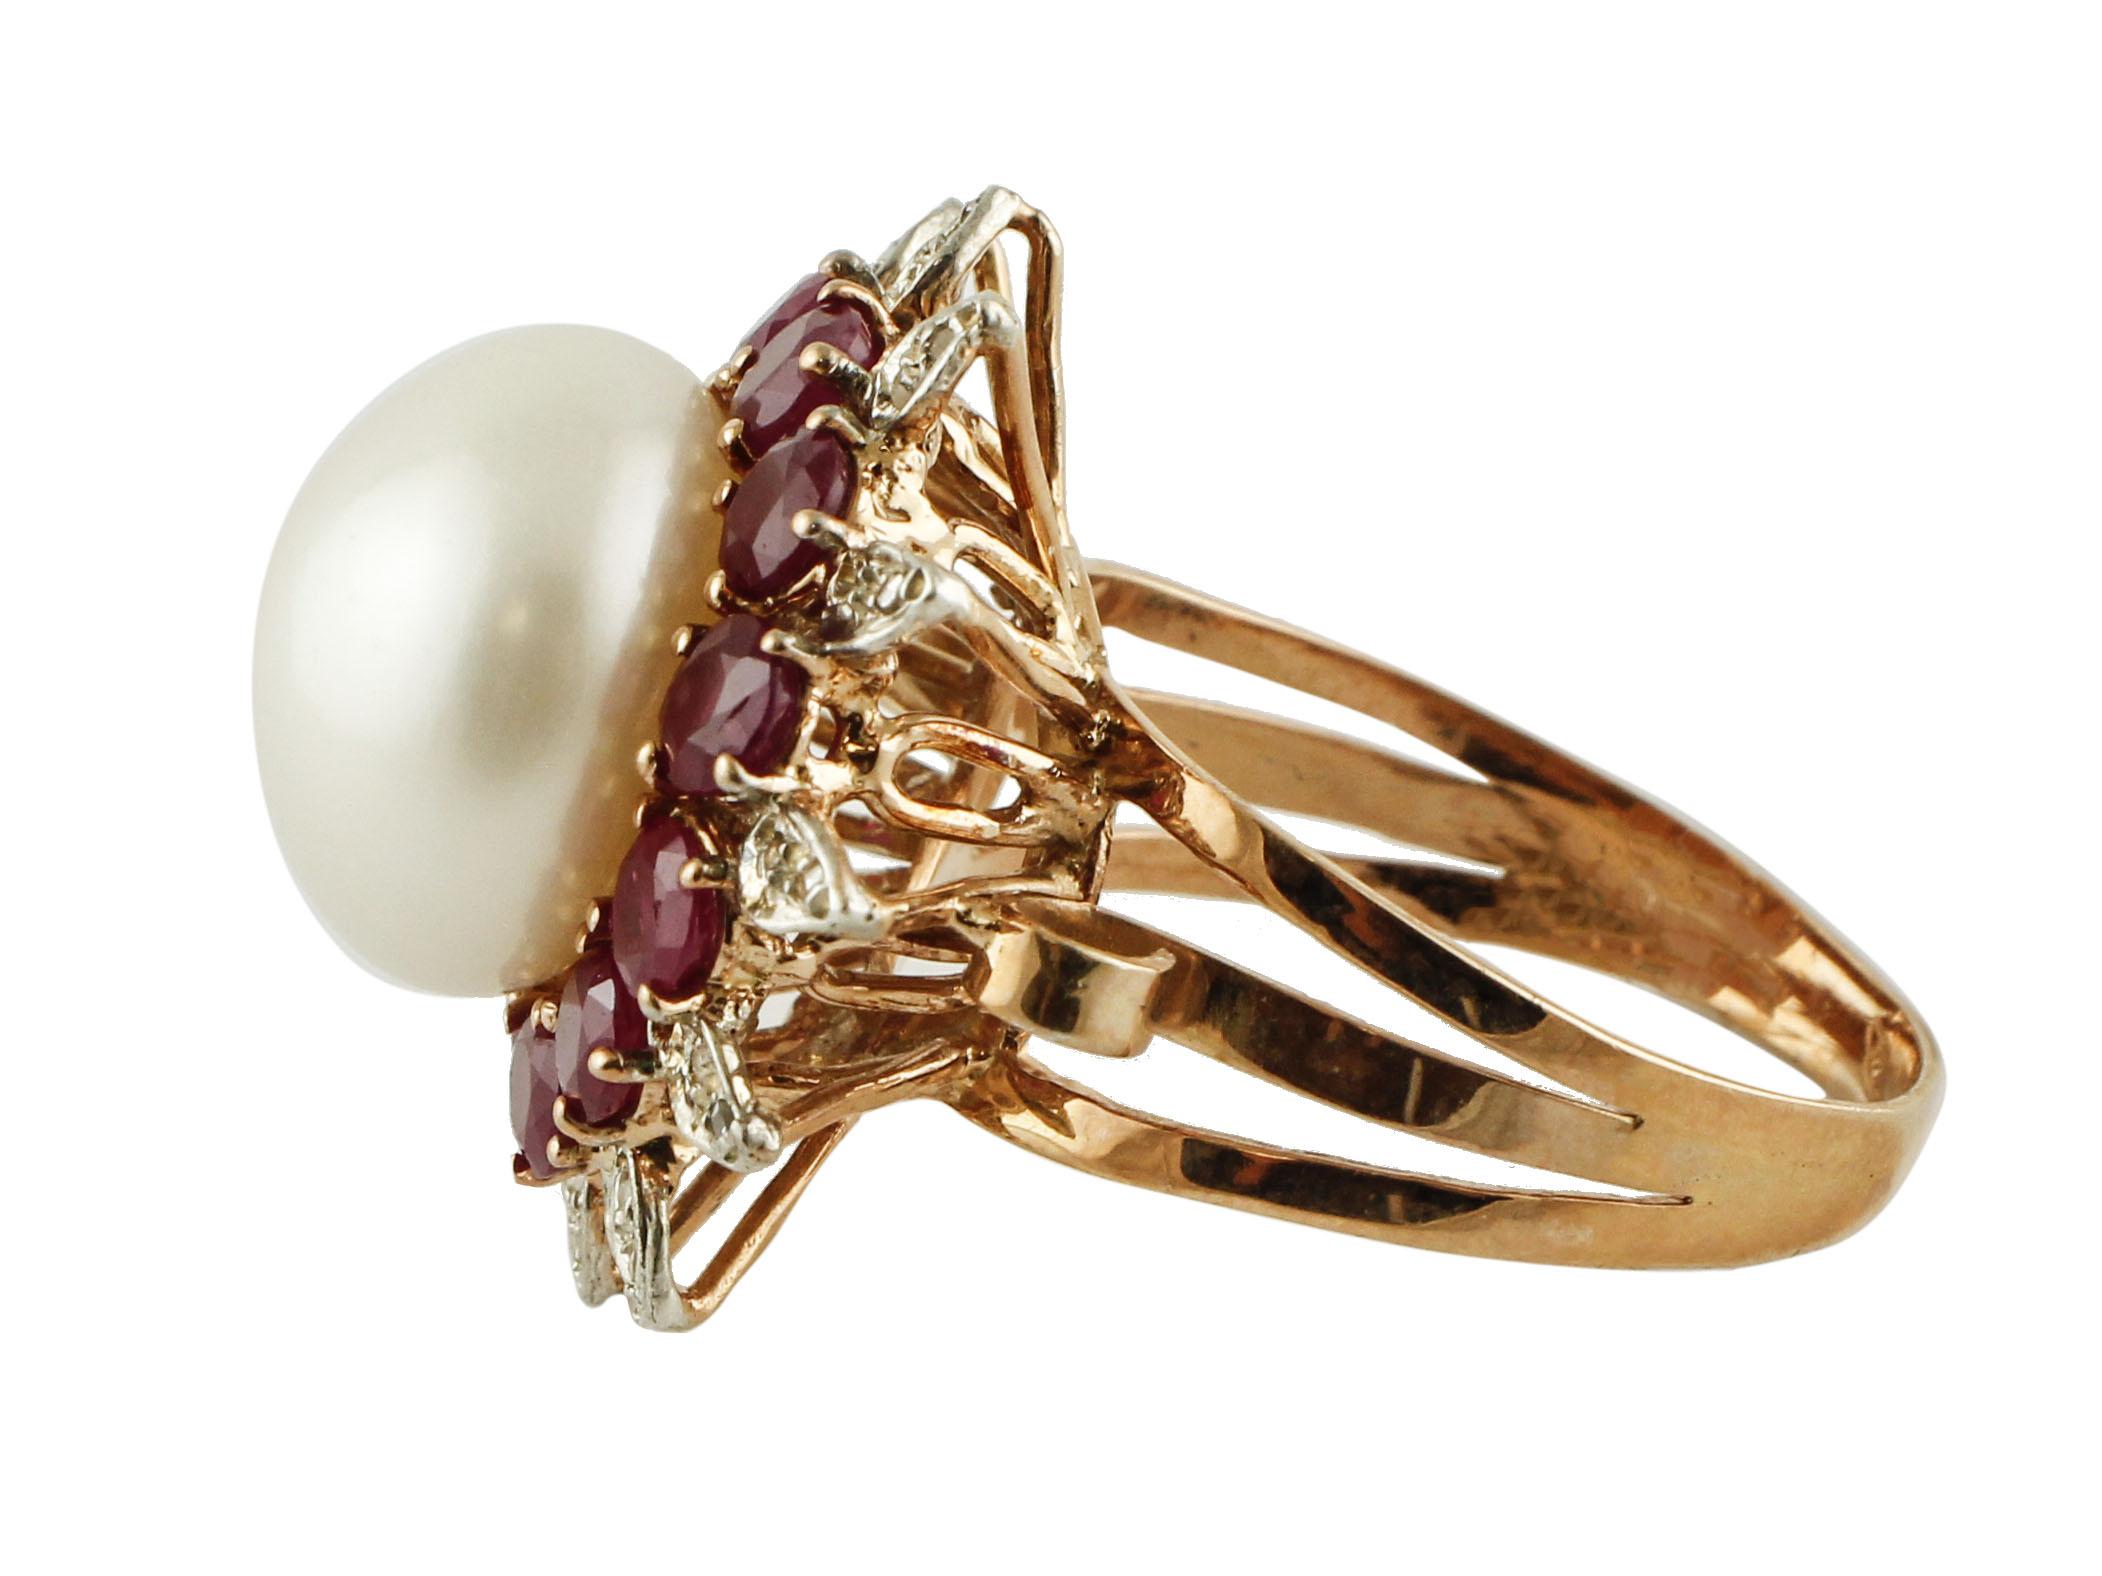 Retro Diamonds, Rubies, White Pearl, Rose Gold and Silver Cluster Flower Ring